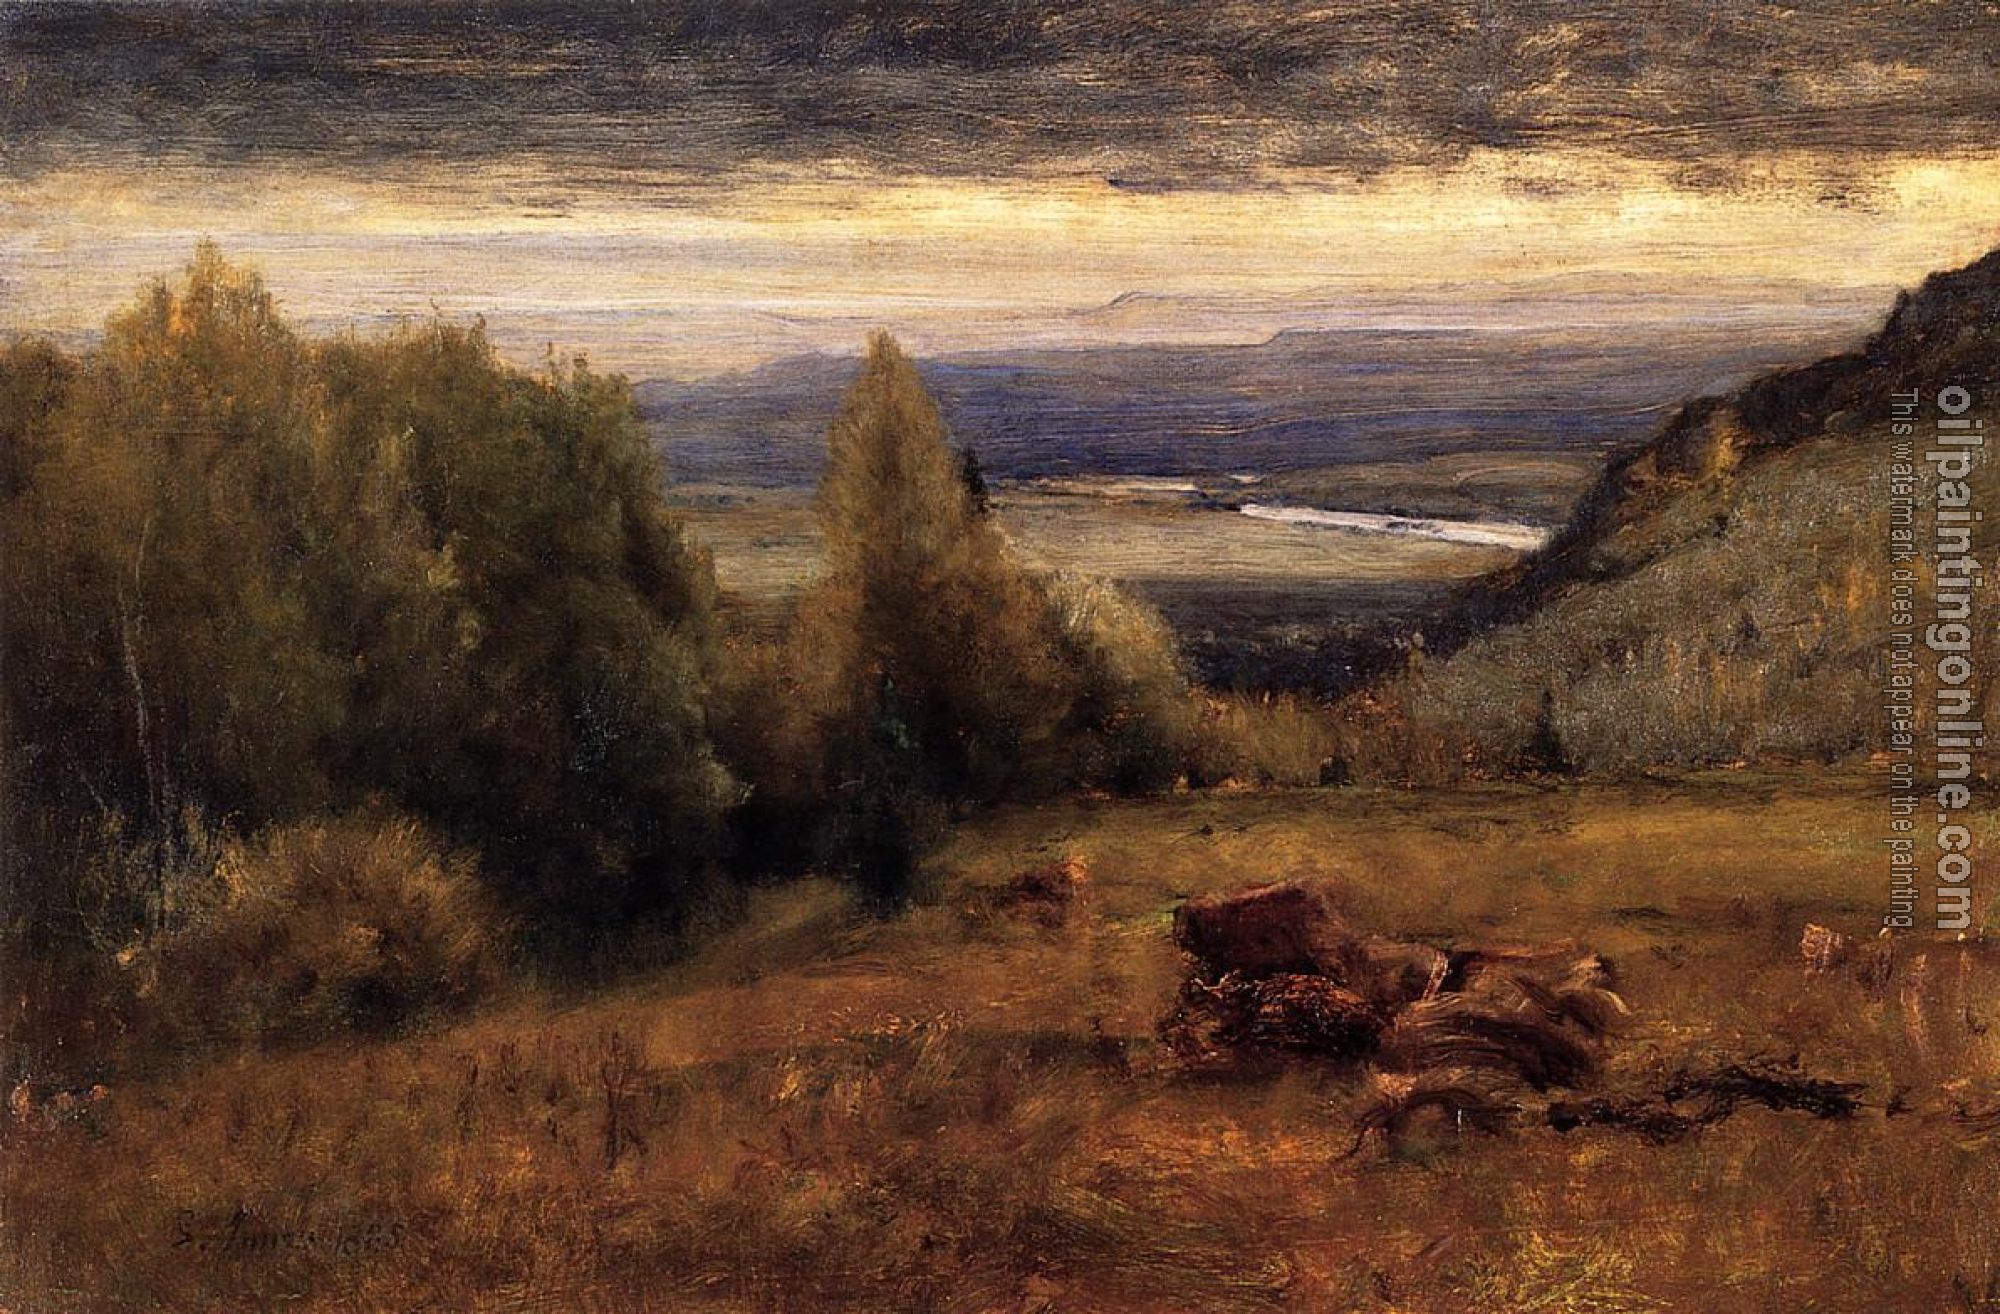 George Inness - From the Sawangunk Mountains